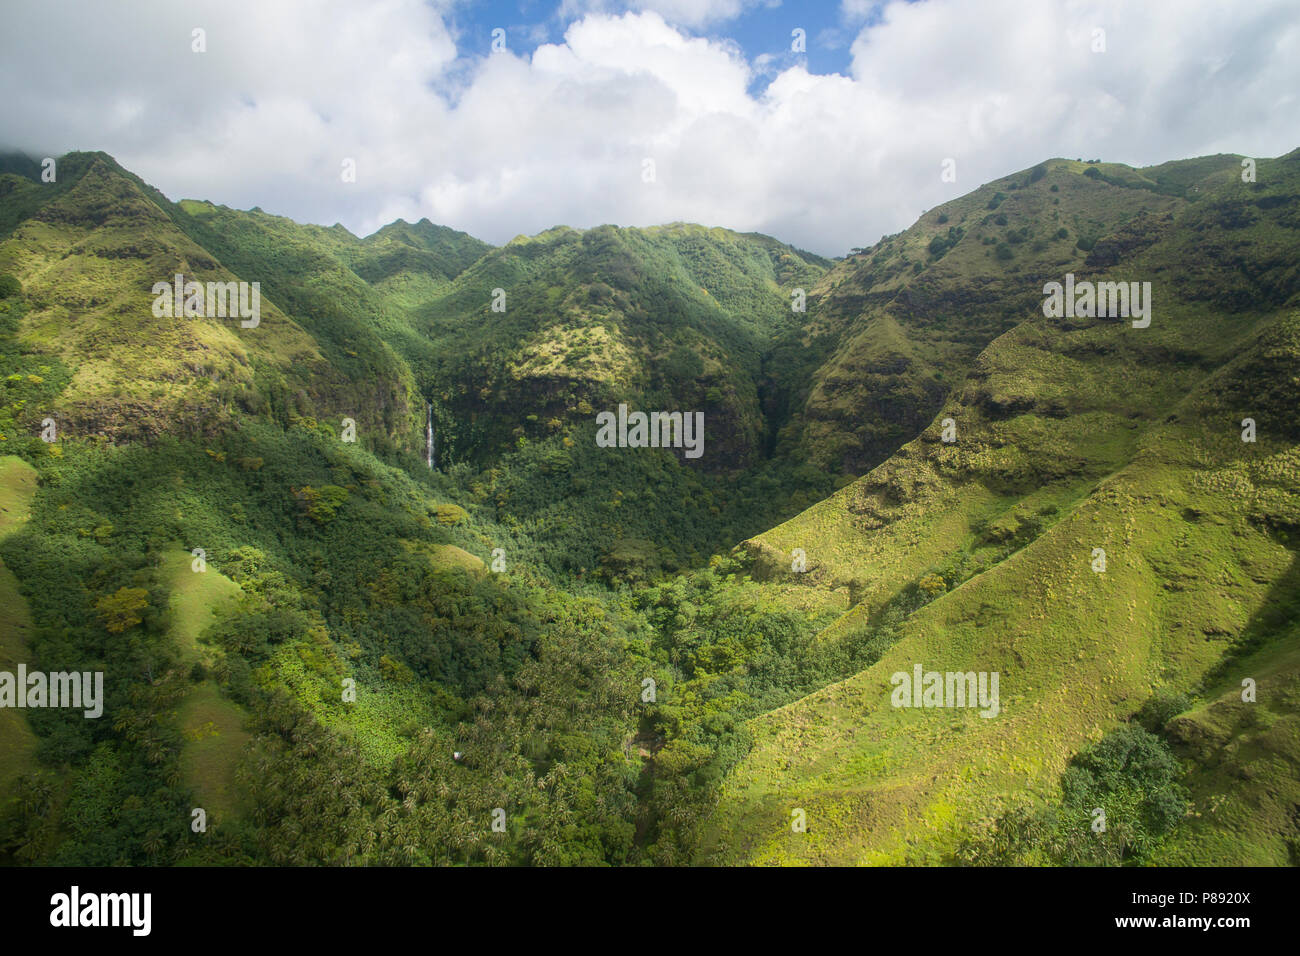 Valley with Waterfall in the Distance, Fatu Hiva Stock Photo